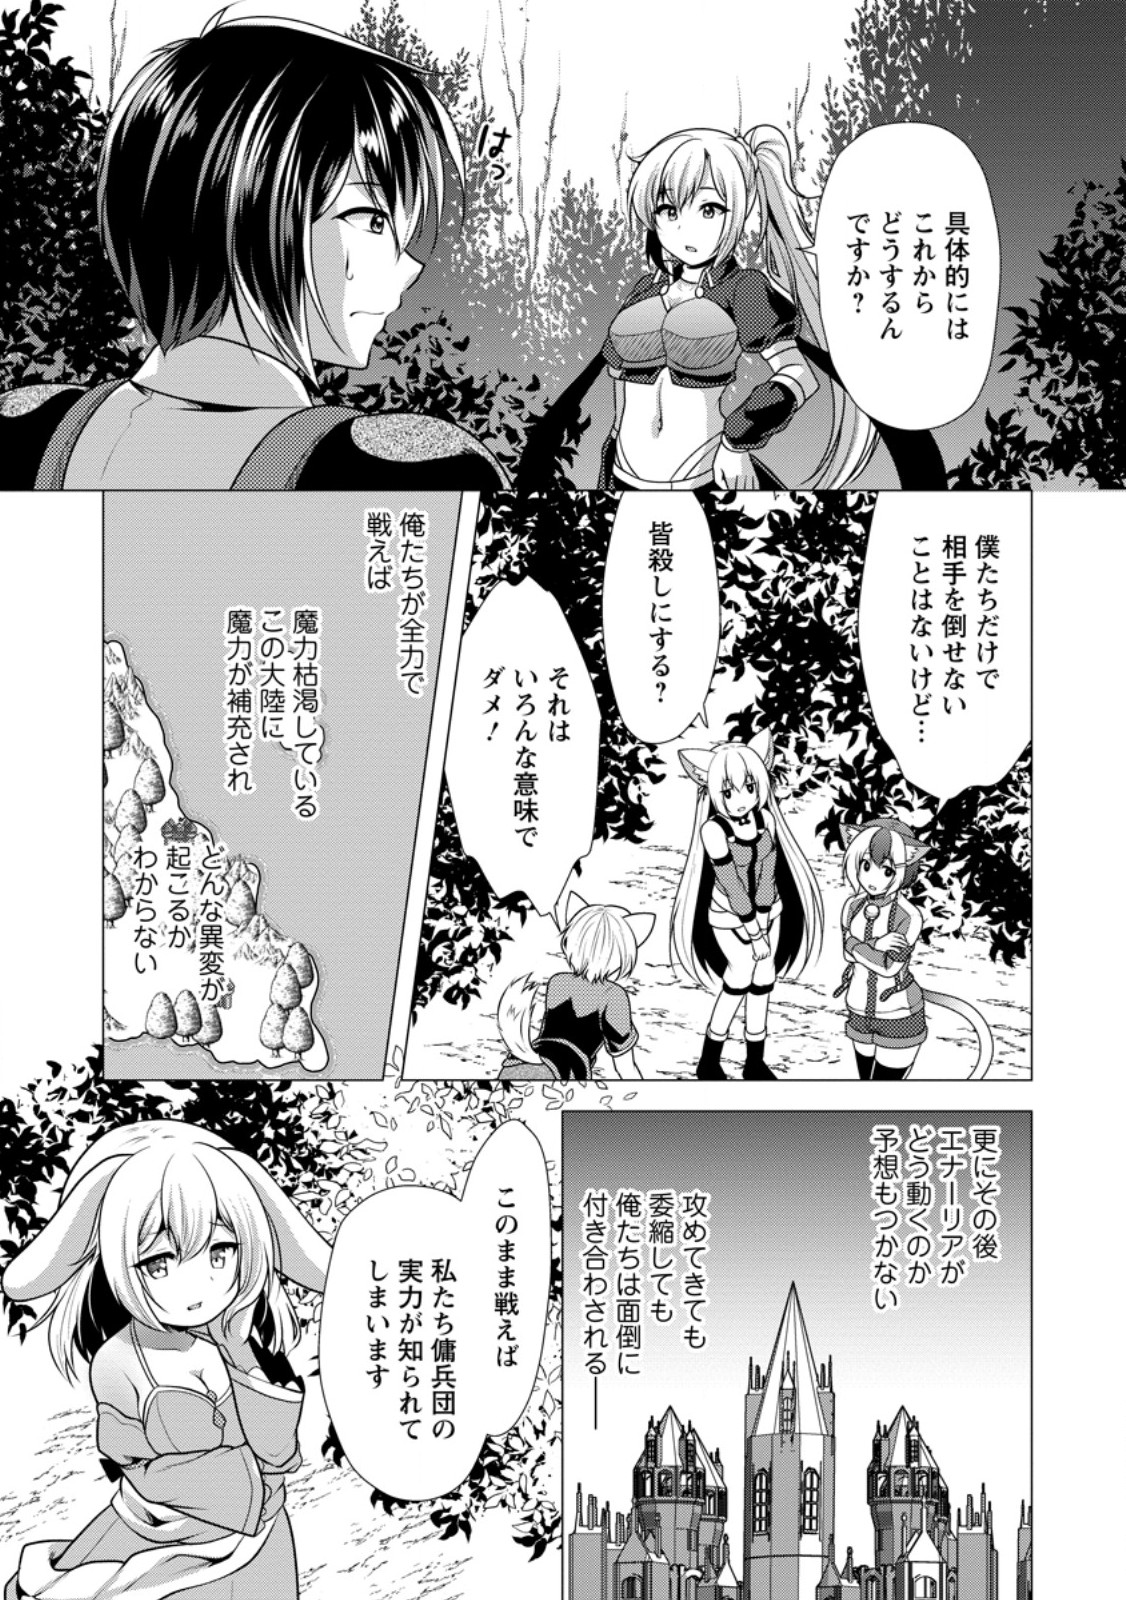 Hisshou Dungeon Unei Houhou - Chapter 57.2 - Page 1